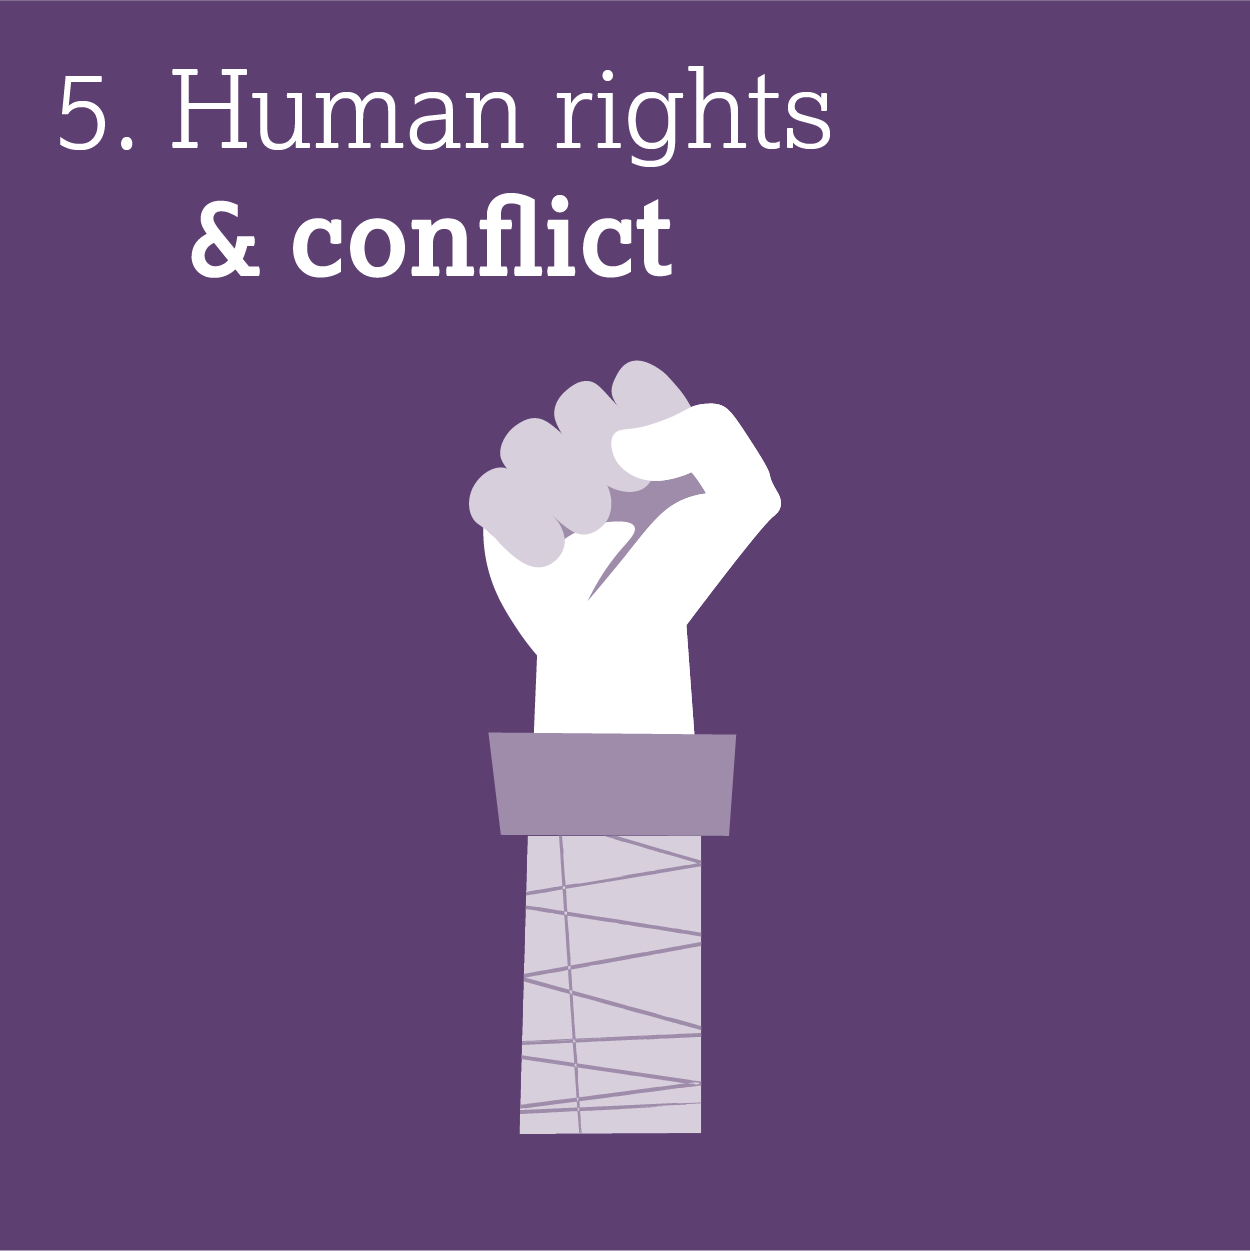 5. Human rights and conflict